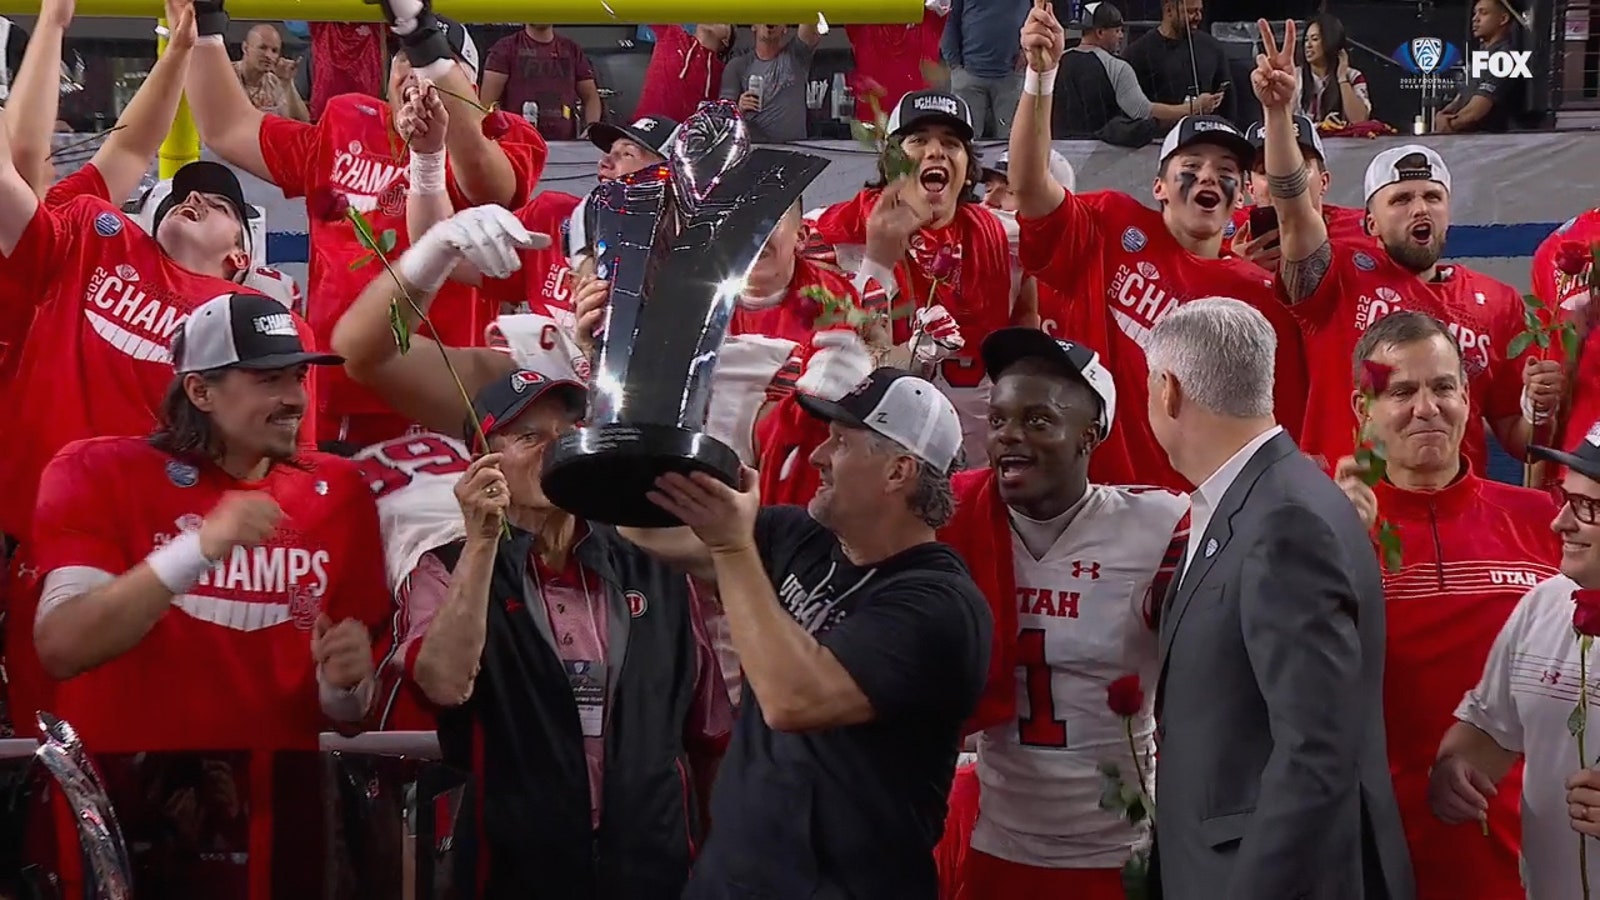 No. 11 Utah hoists the Pac-12 trophy after upsetting No. 4 USC